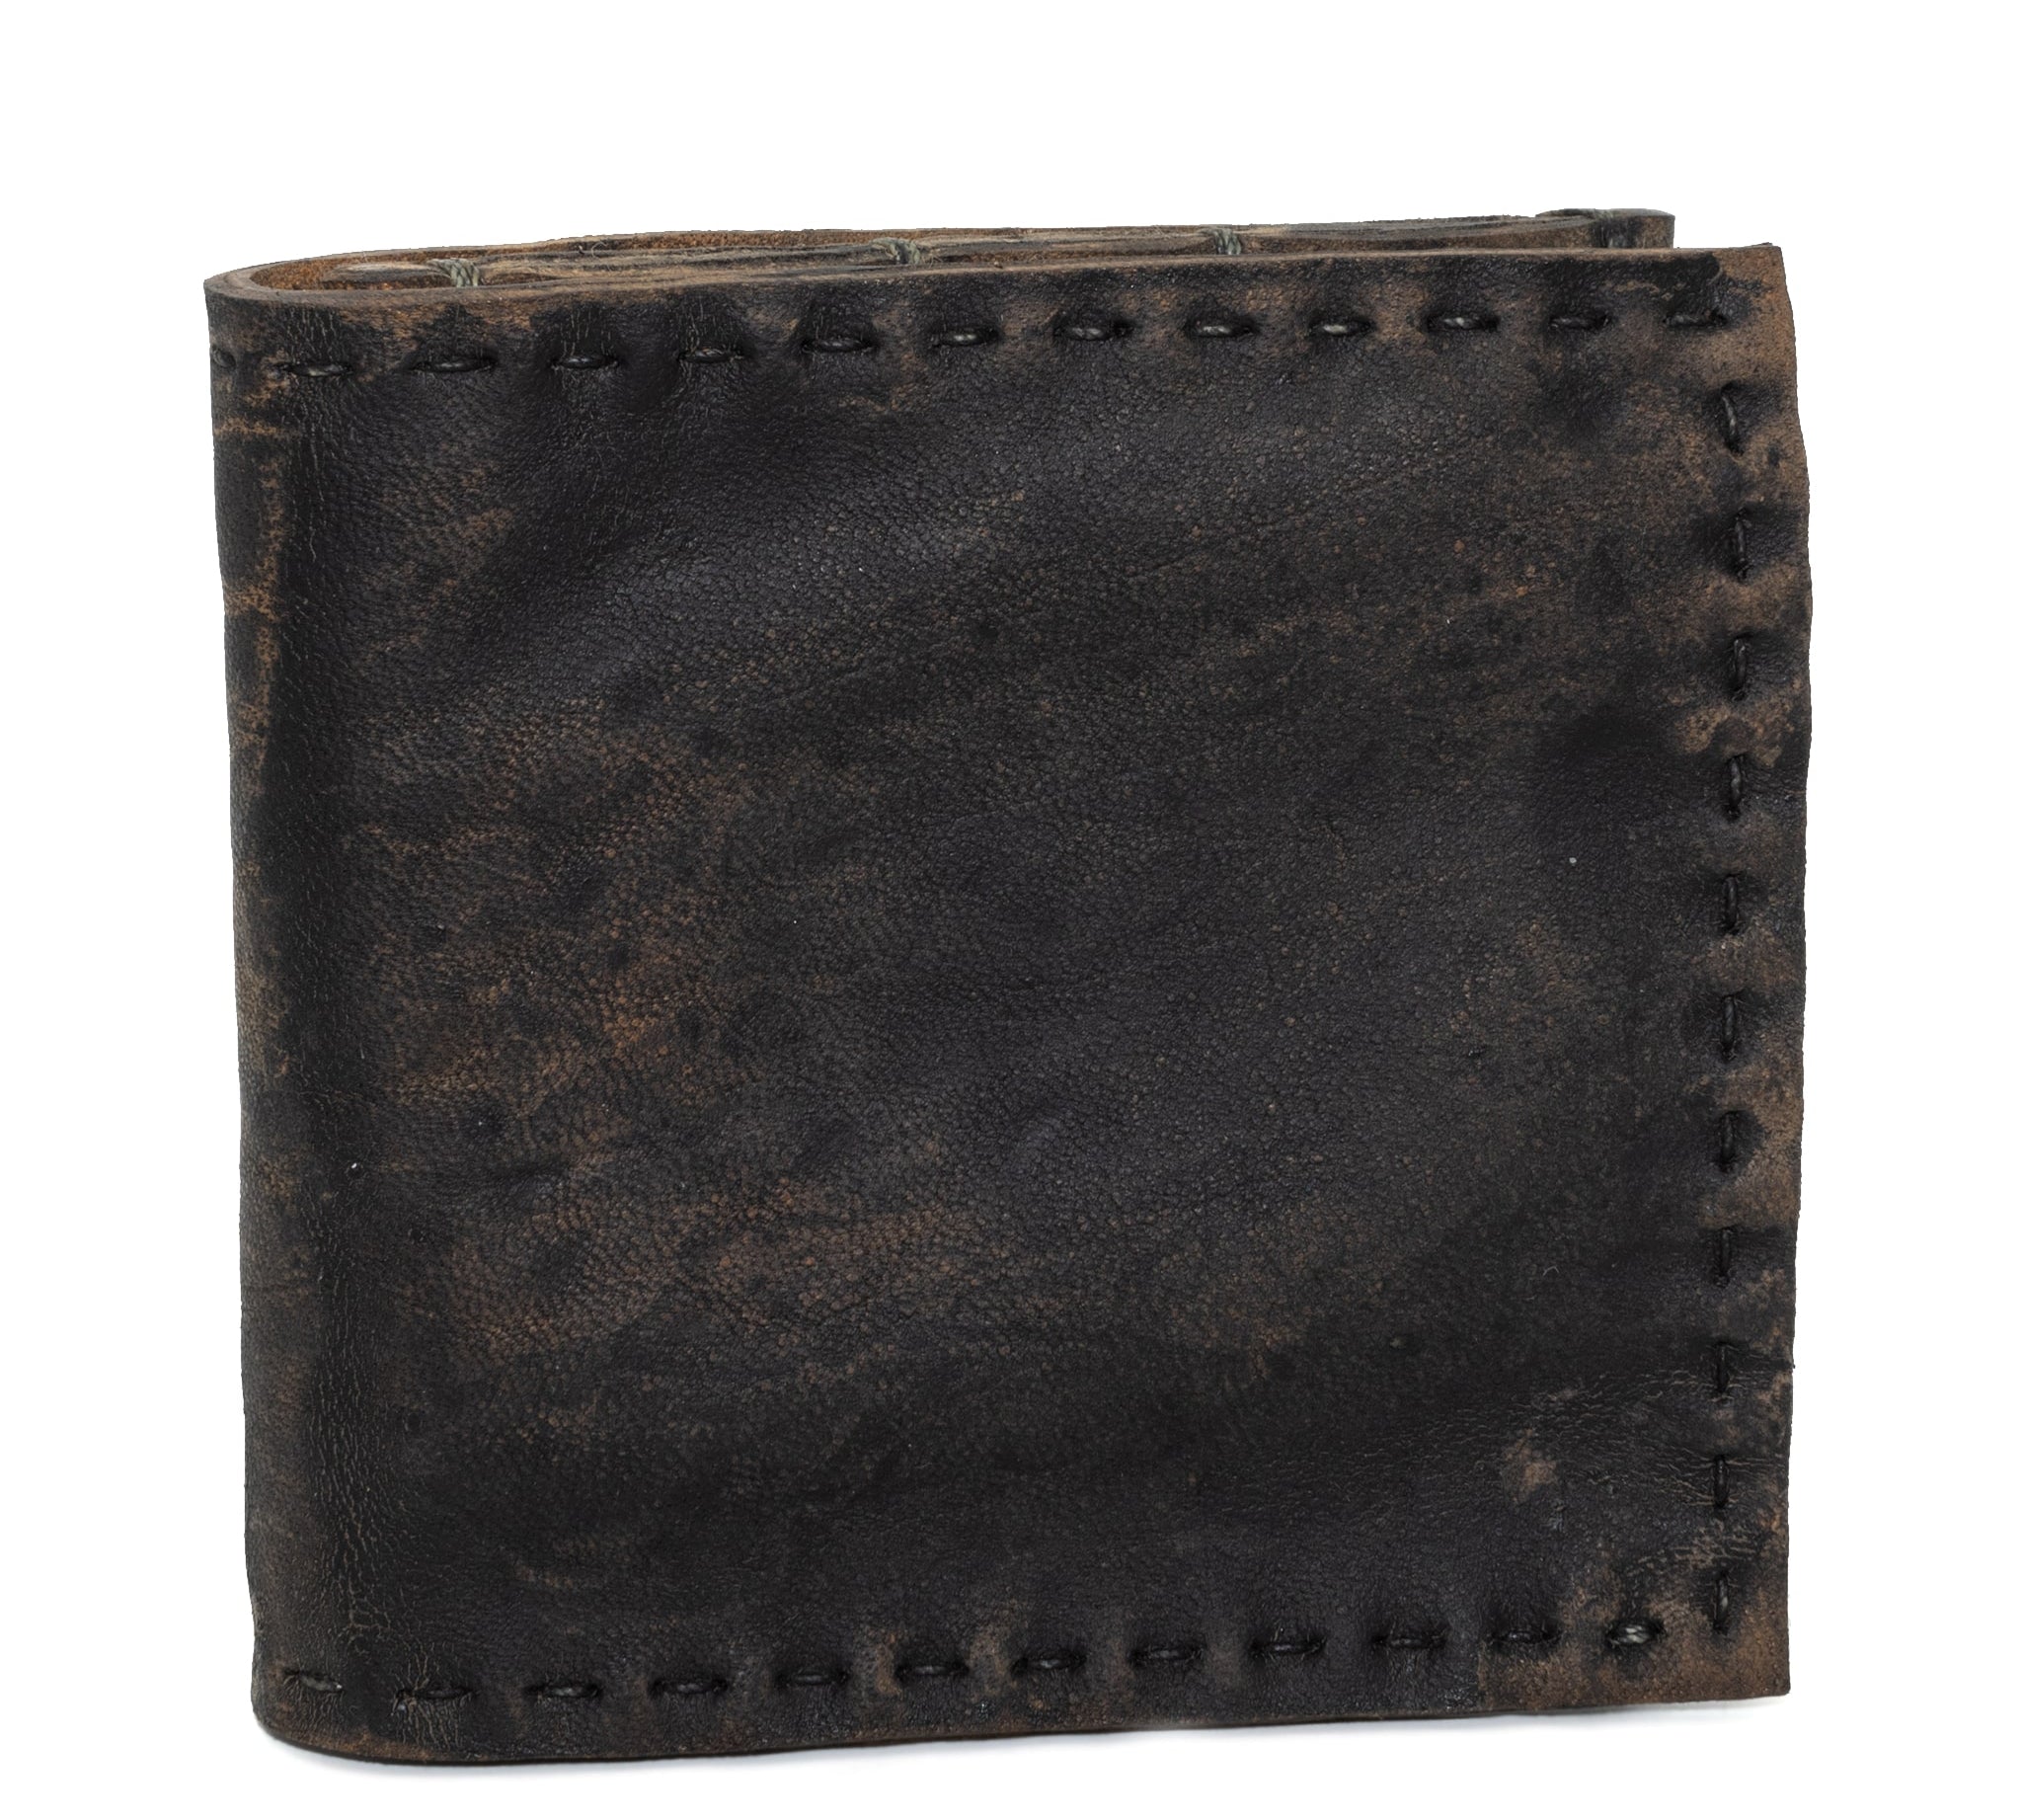 avant garde hand dyed leather wallets in a premium horse culatta available online at atelier skn.